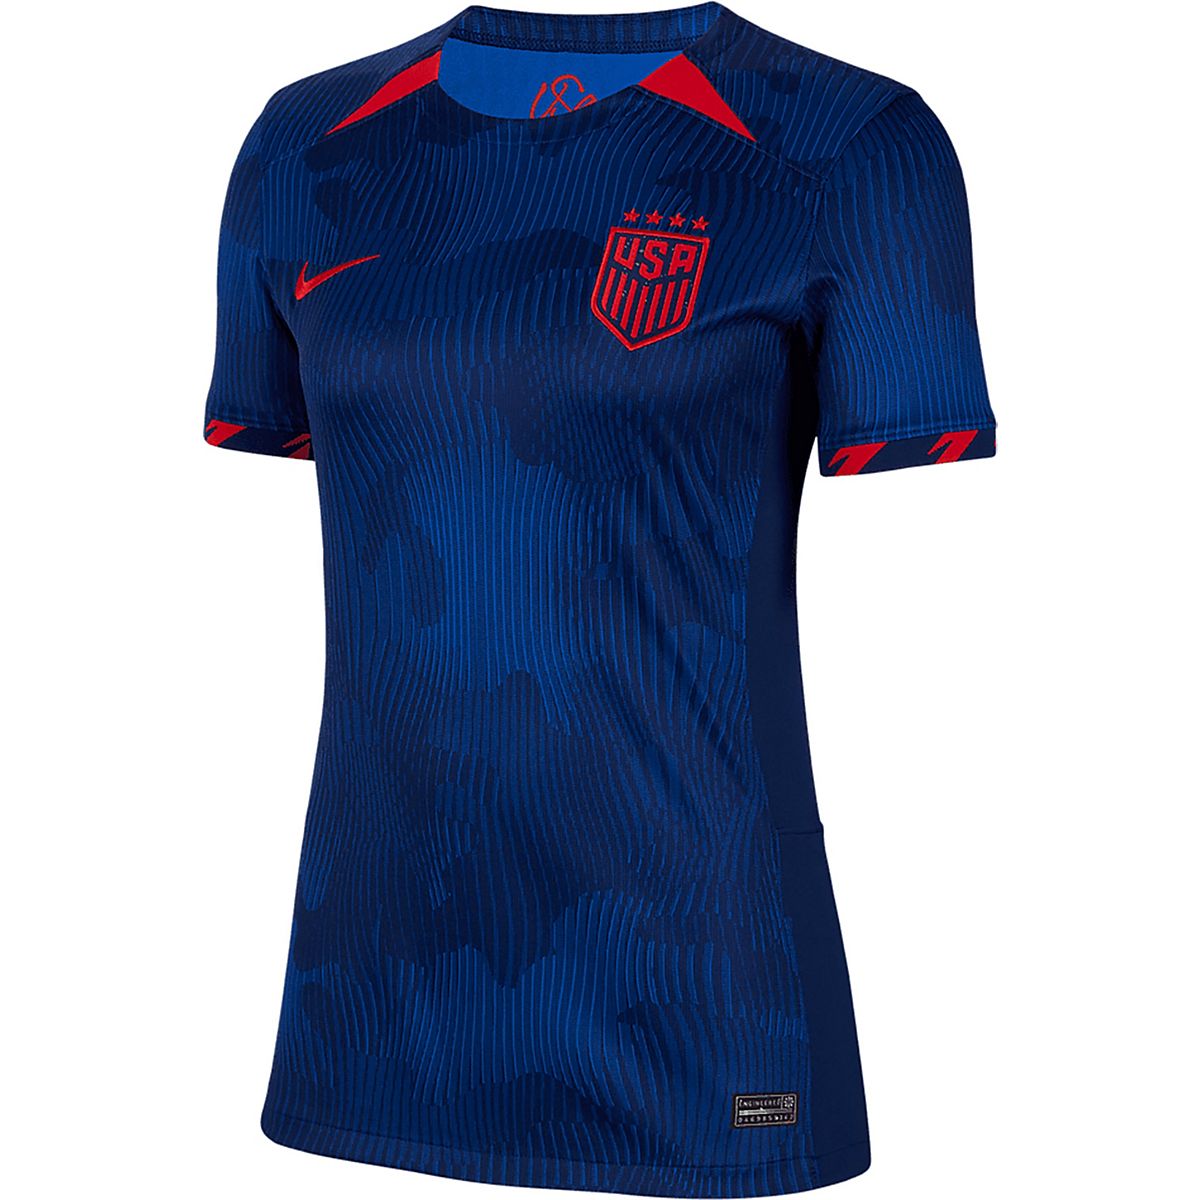 USA women's World Cup 2023 jerseys unveiled by Nike, U.S. Soccer